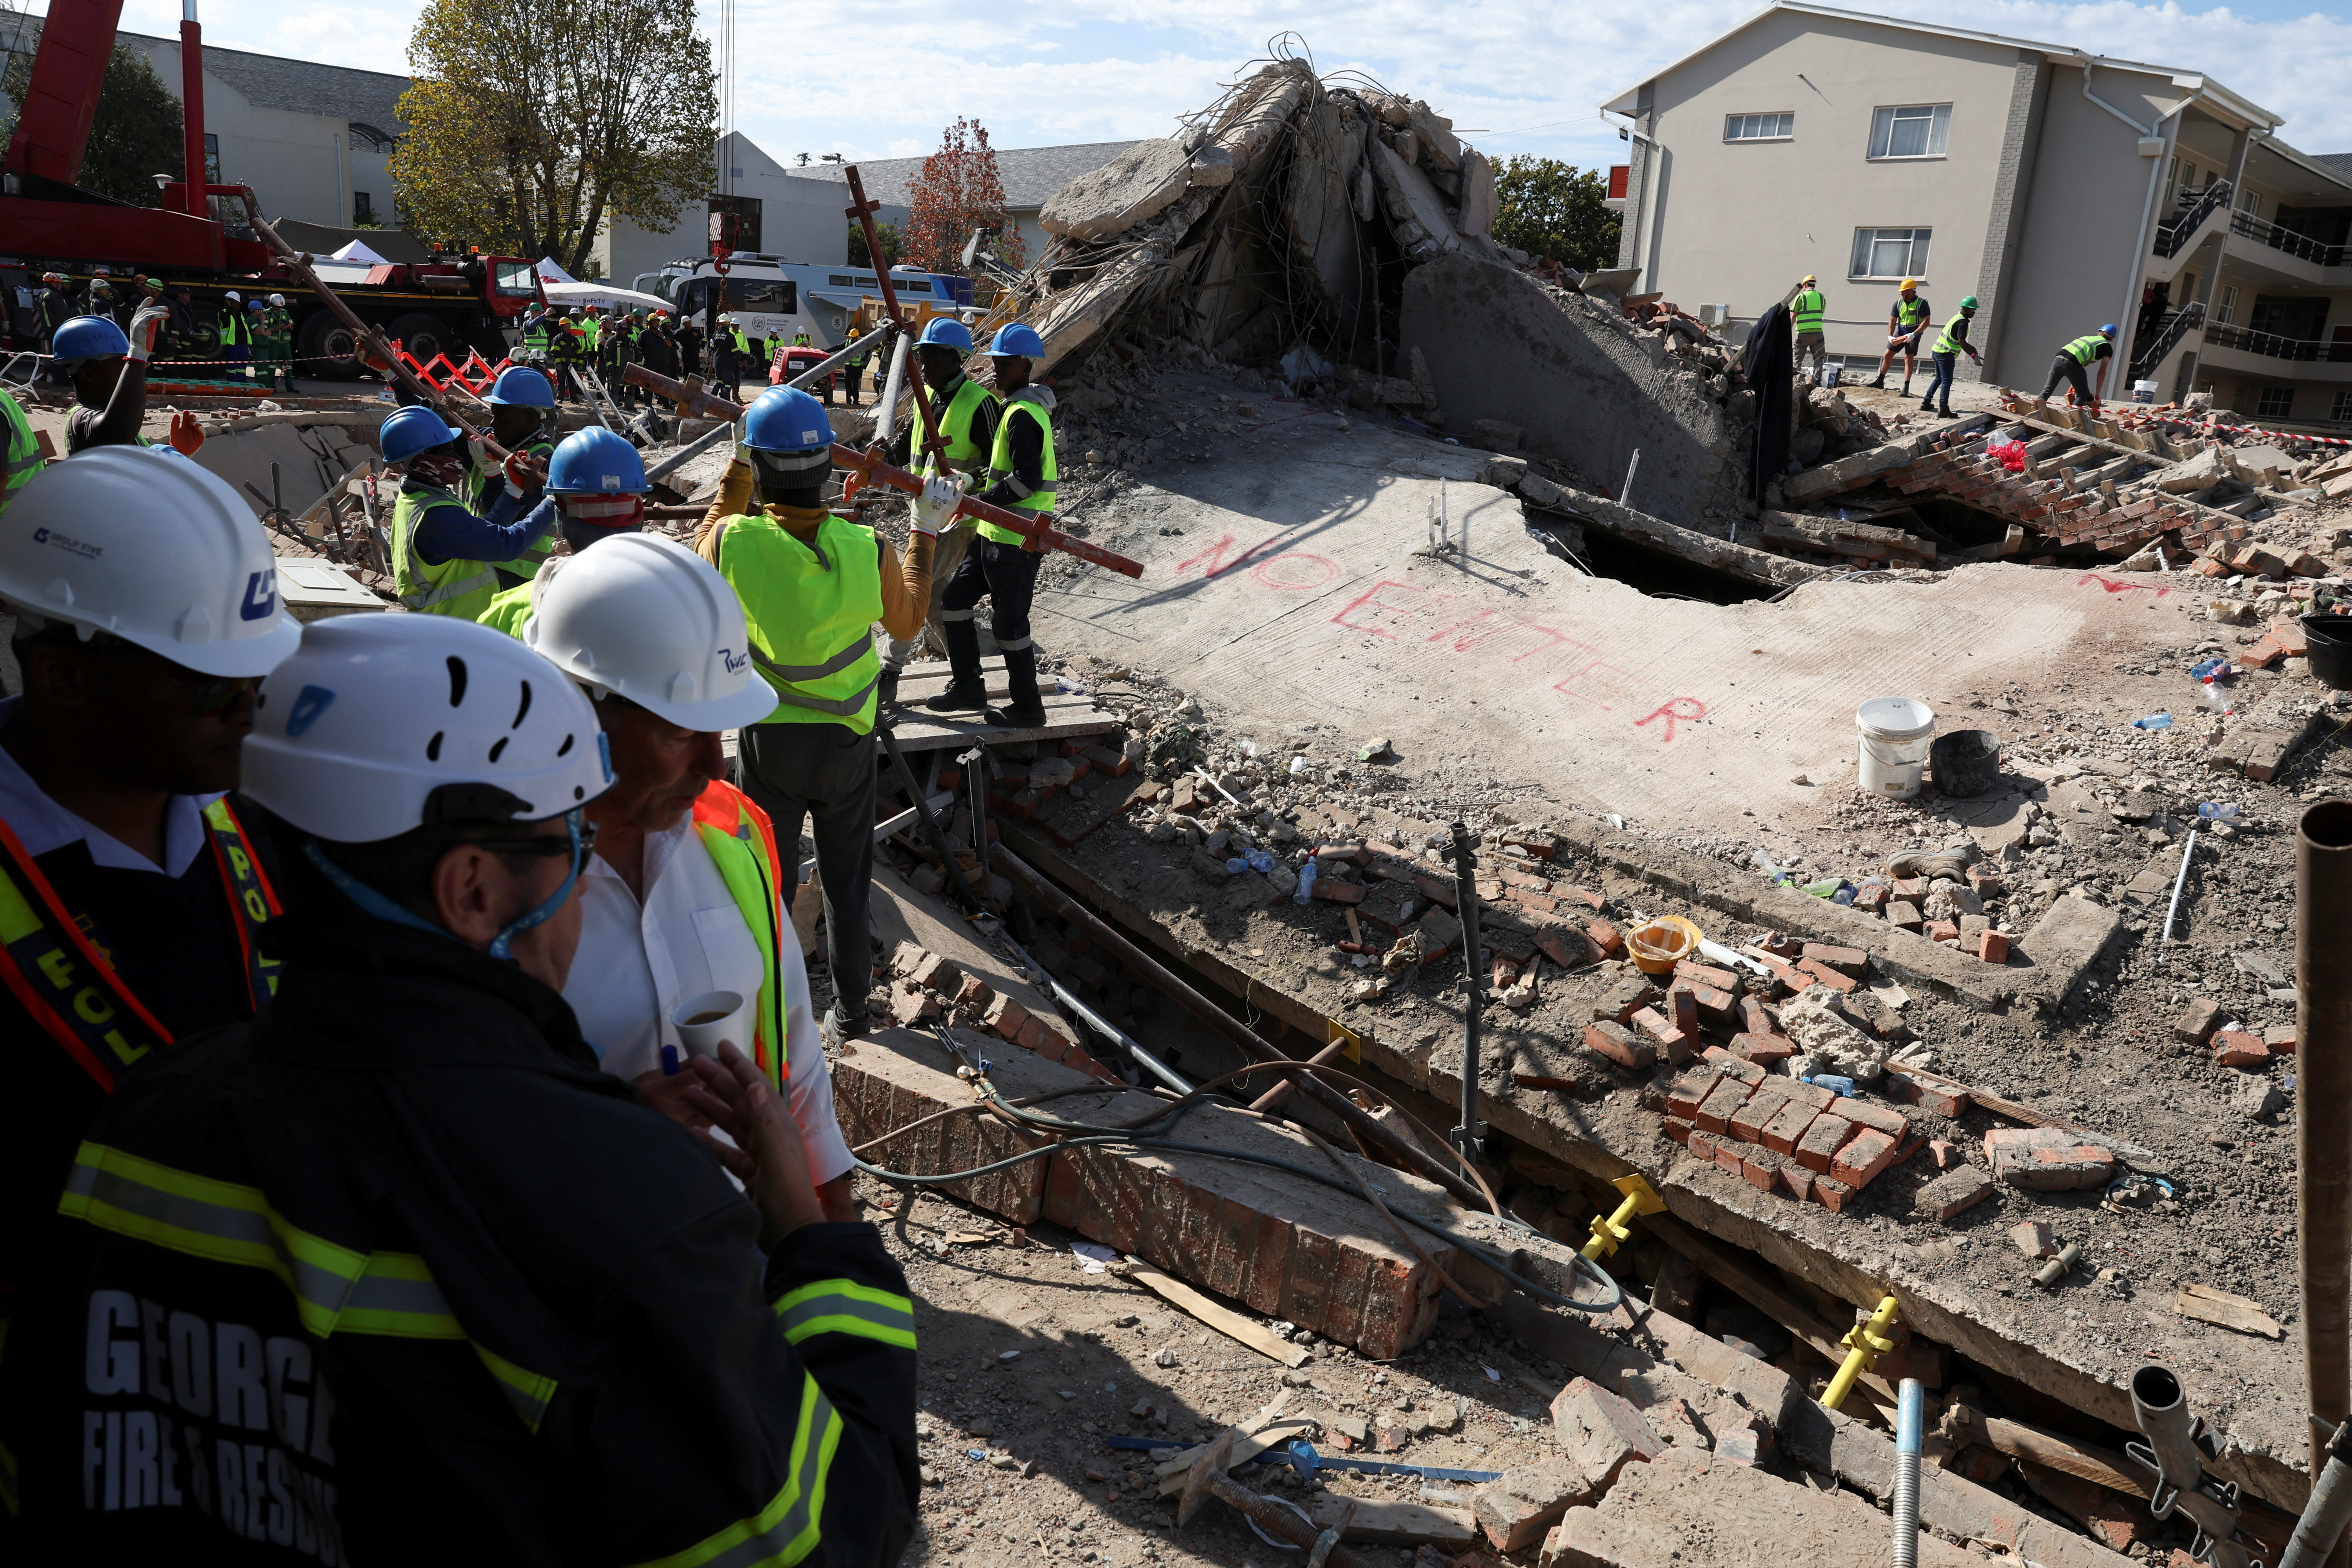 Rescuers work to rescue construction workers trapped under a building that collapsed in George